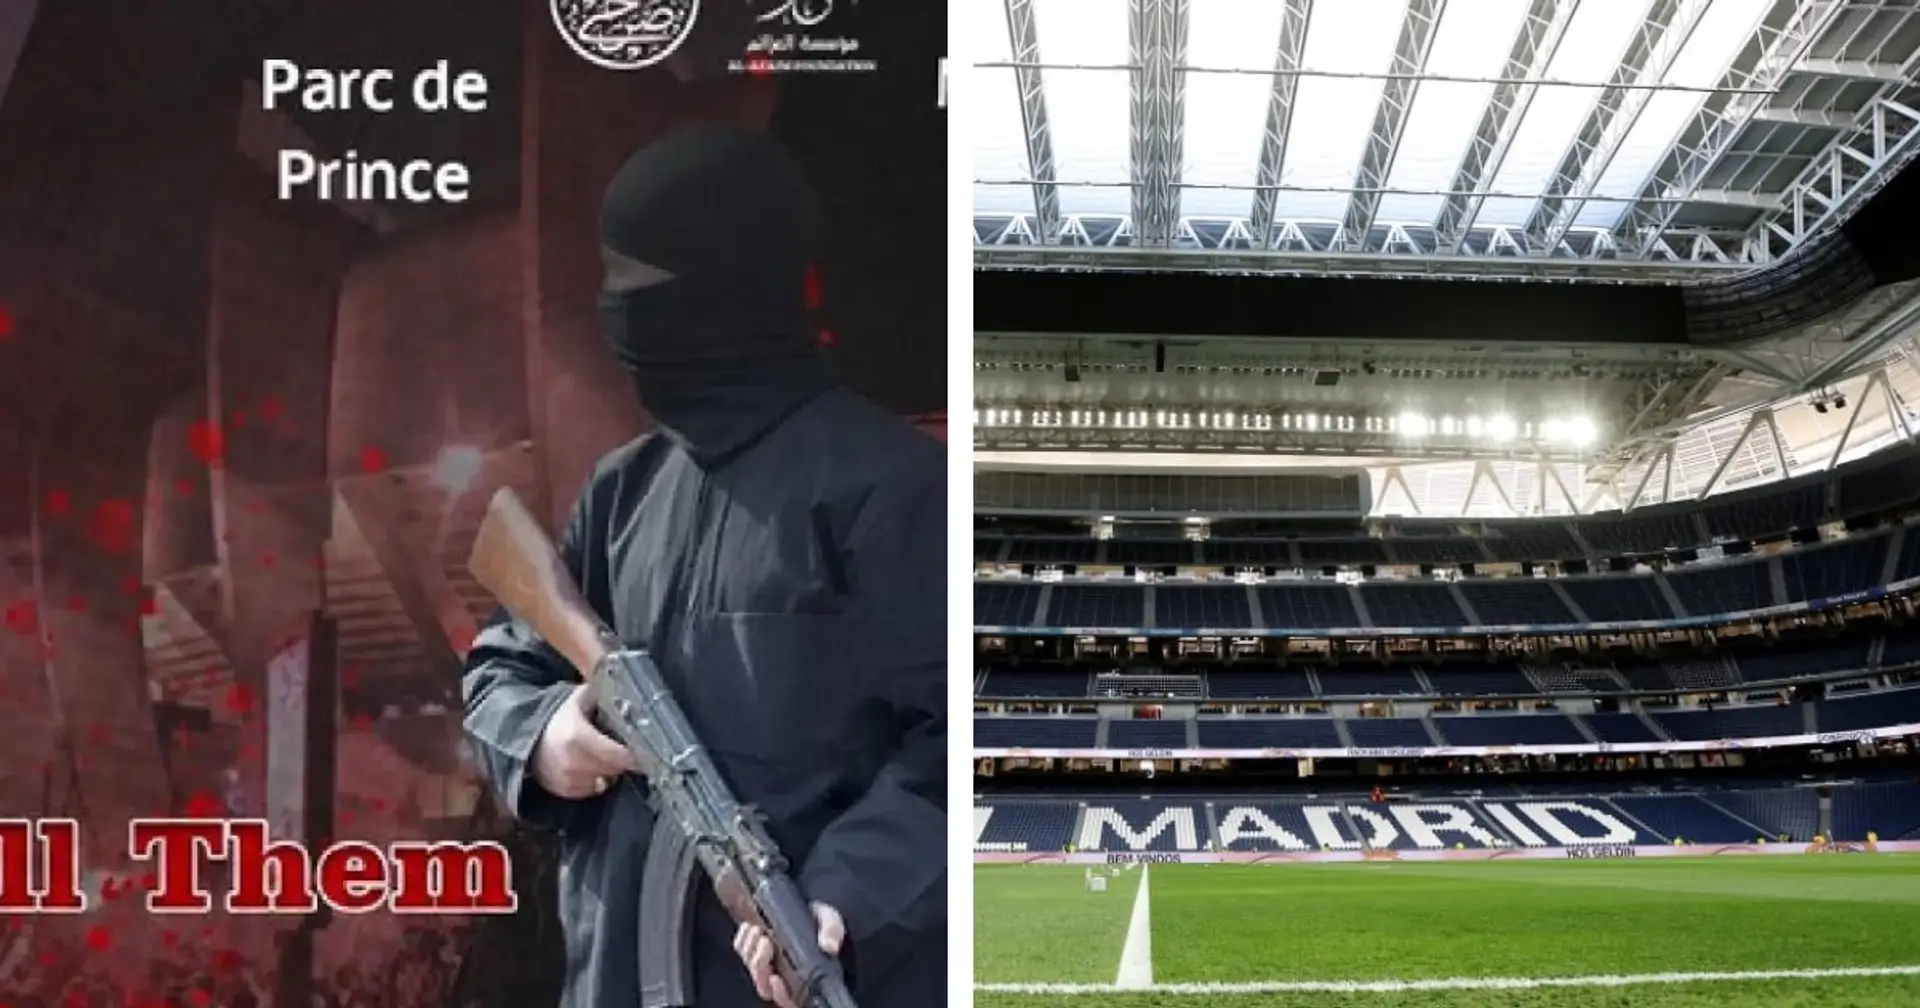 Does Real Madrid's decision to close Bernabeu roof have anything to do with ISIS threat? 